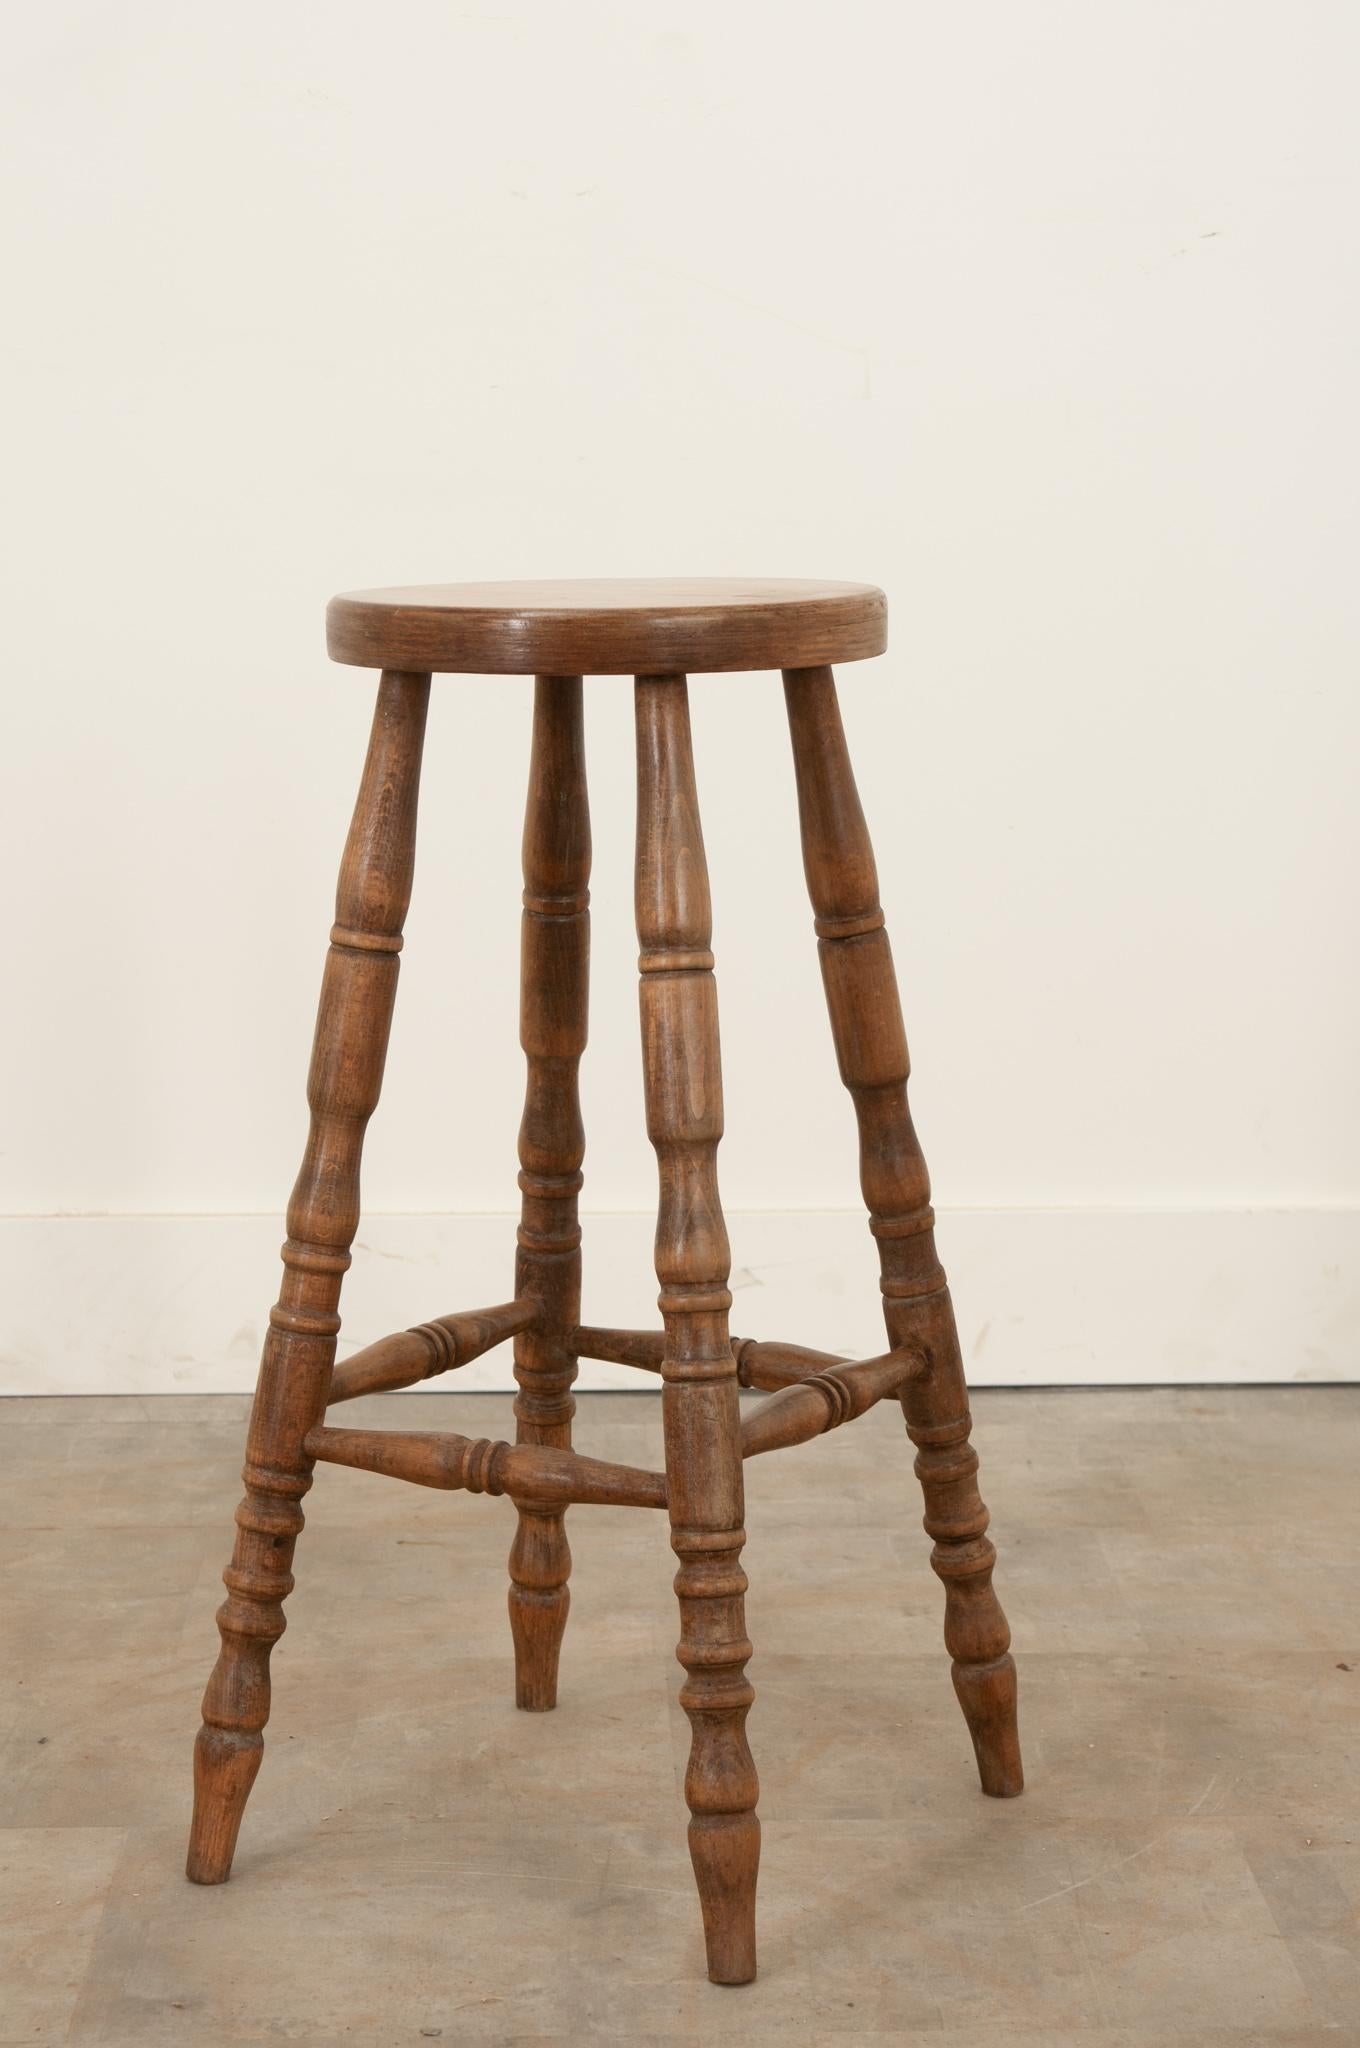 This simply constructed counter stool was crafted from solid oak in England during the 19th century. A great patina envelops the whole. Sturdy and level on wonderfully turned legs. Make sure to view the detailed images for a closer look.